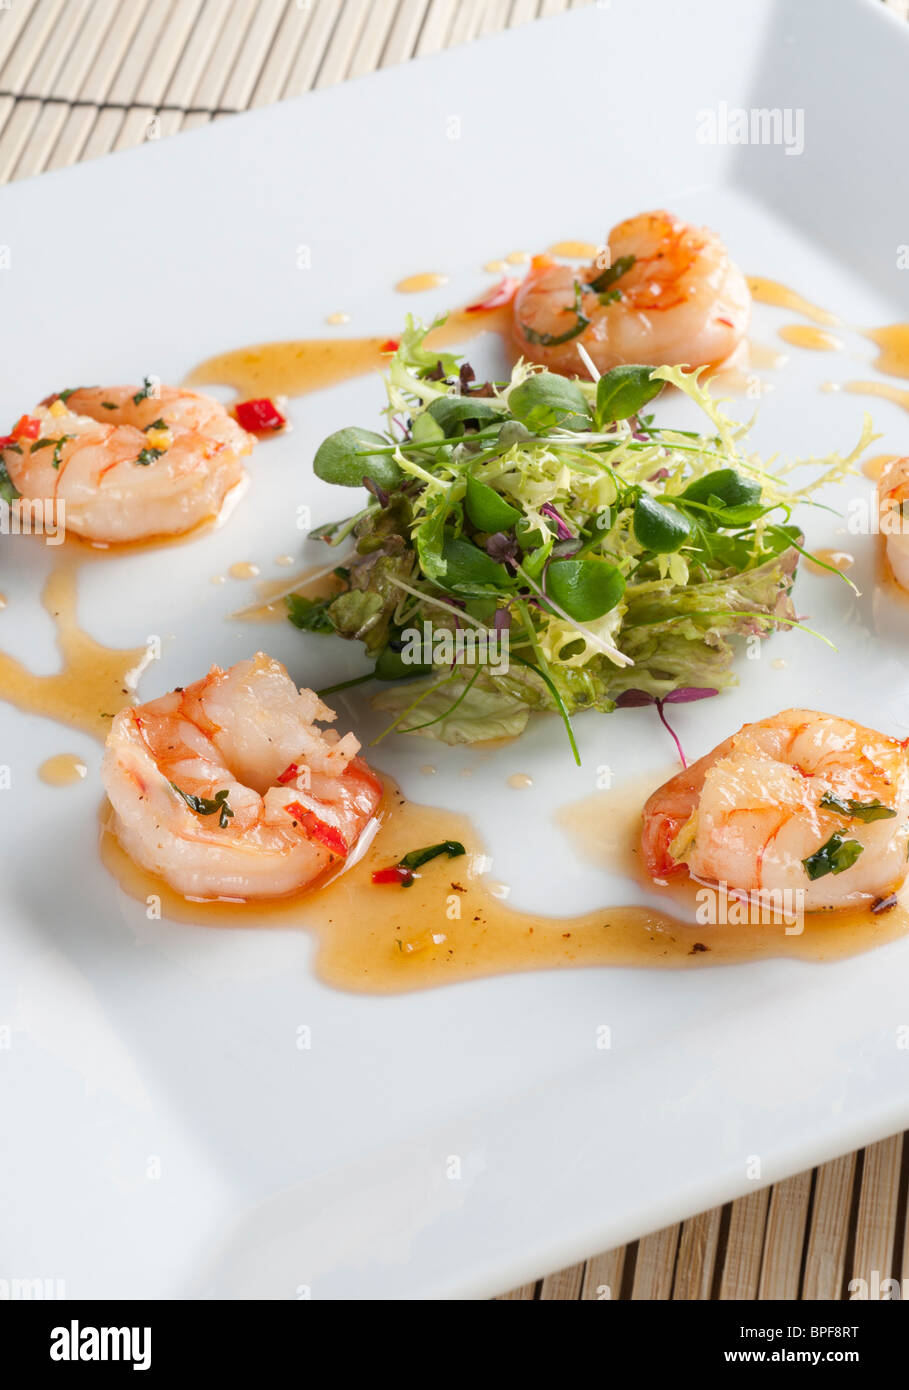 Sauté prawns with chill, ginger and coriander with a nest of baby leaf salad Stock Photo